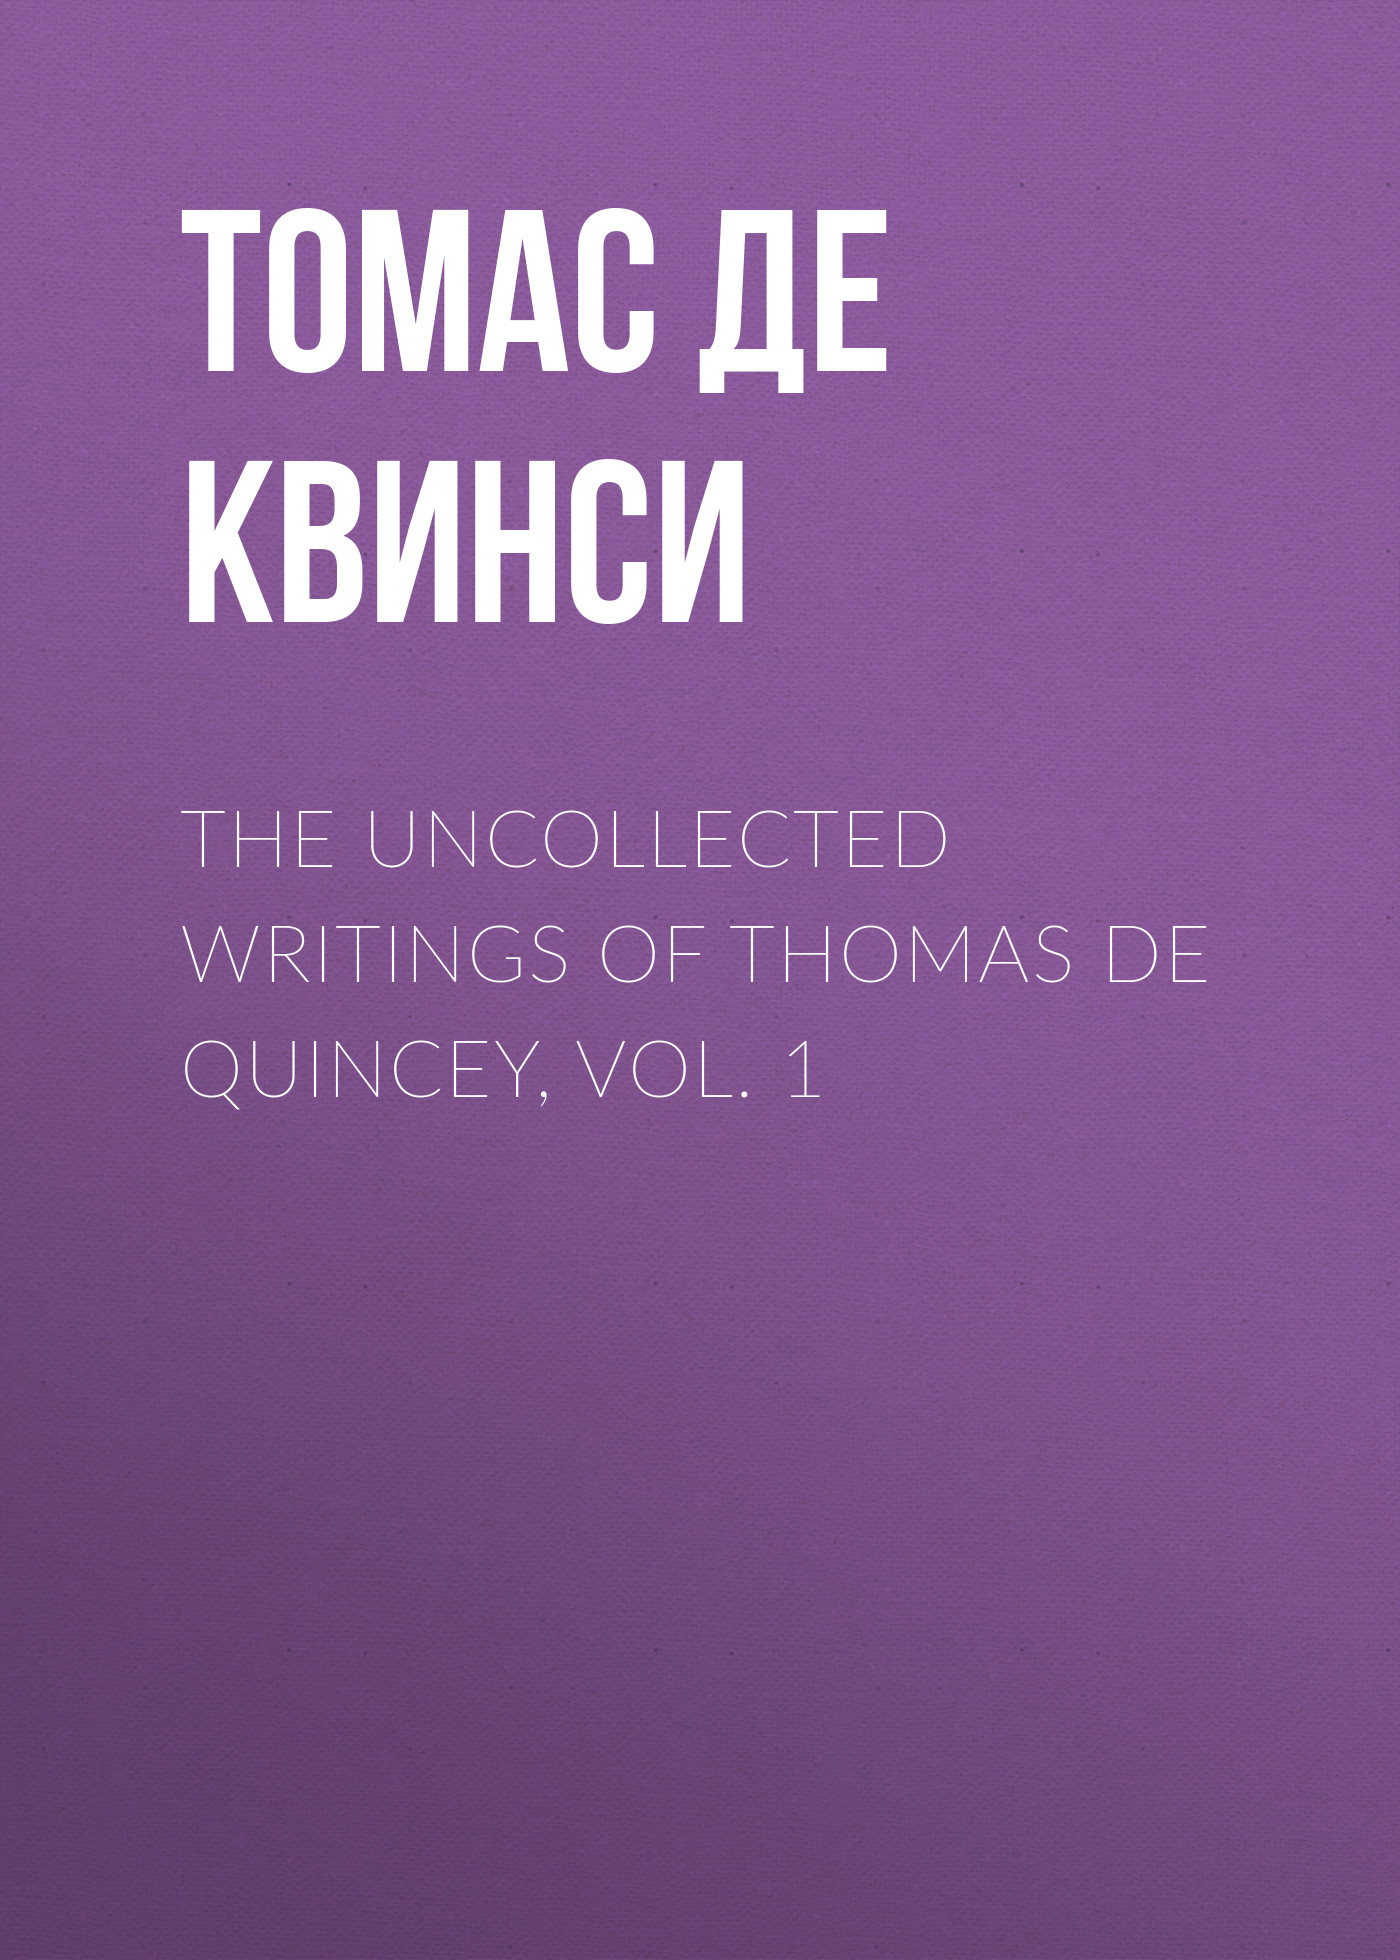 The Uncollected Writings of Thomas de Quincey, Vol. 1